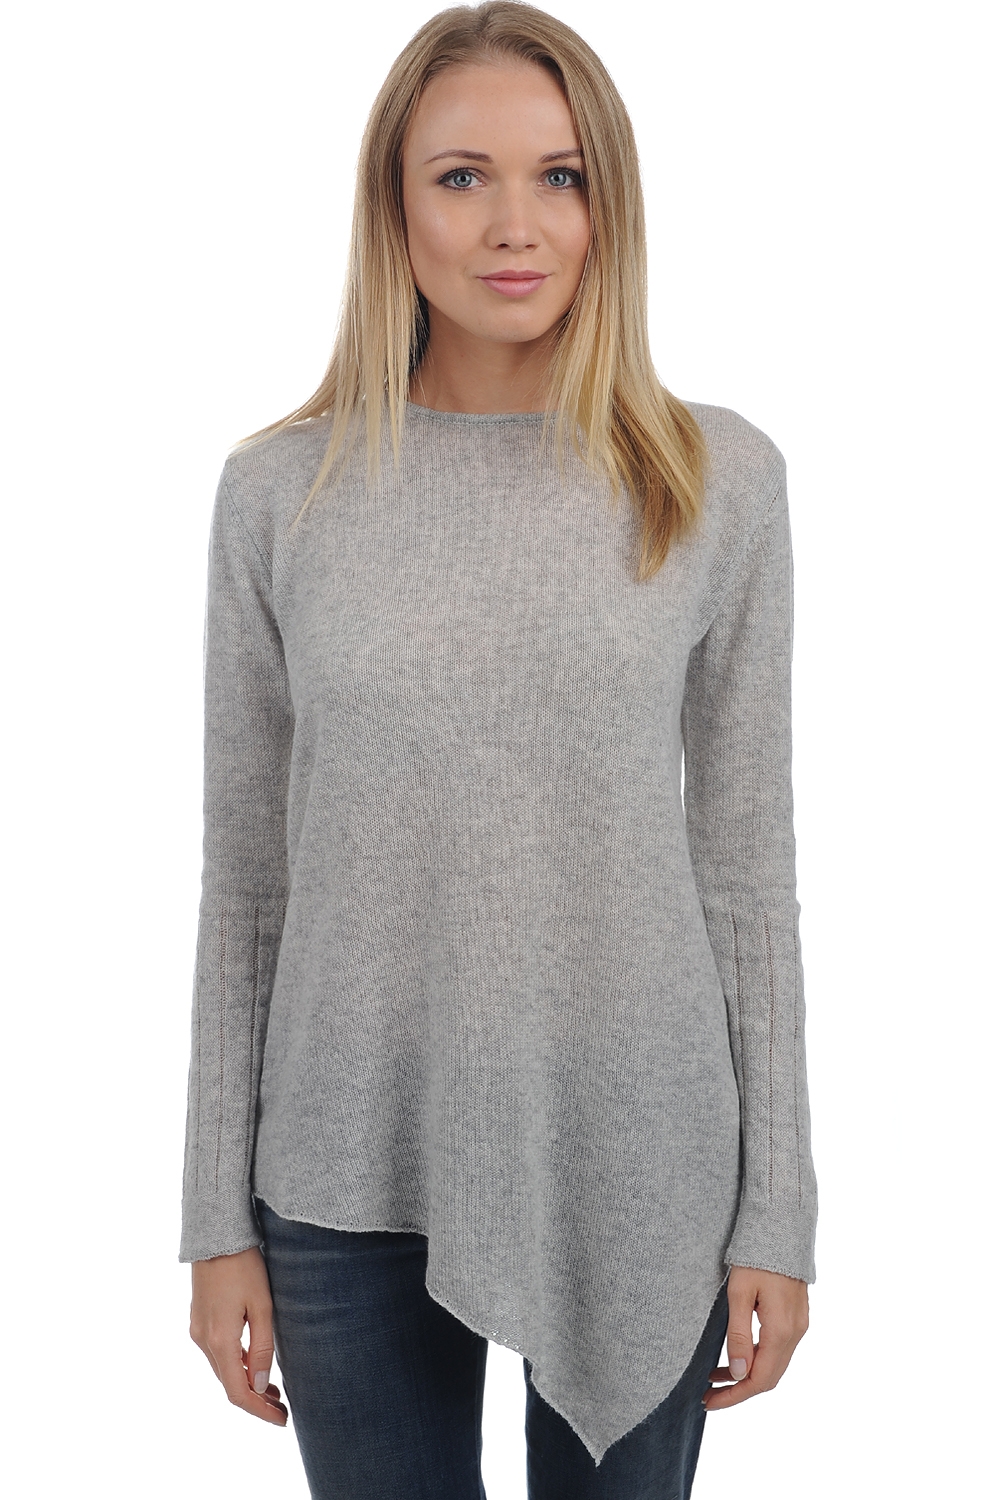 Cashmere ladies timeless classics zaia flanelle chine s